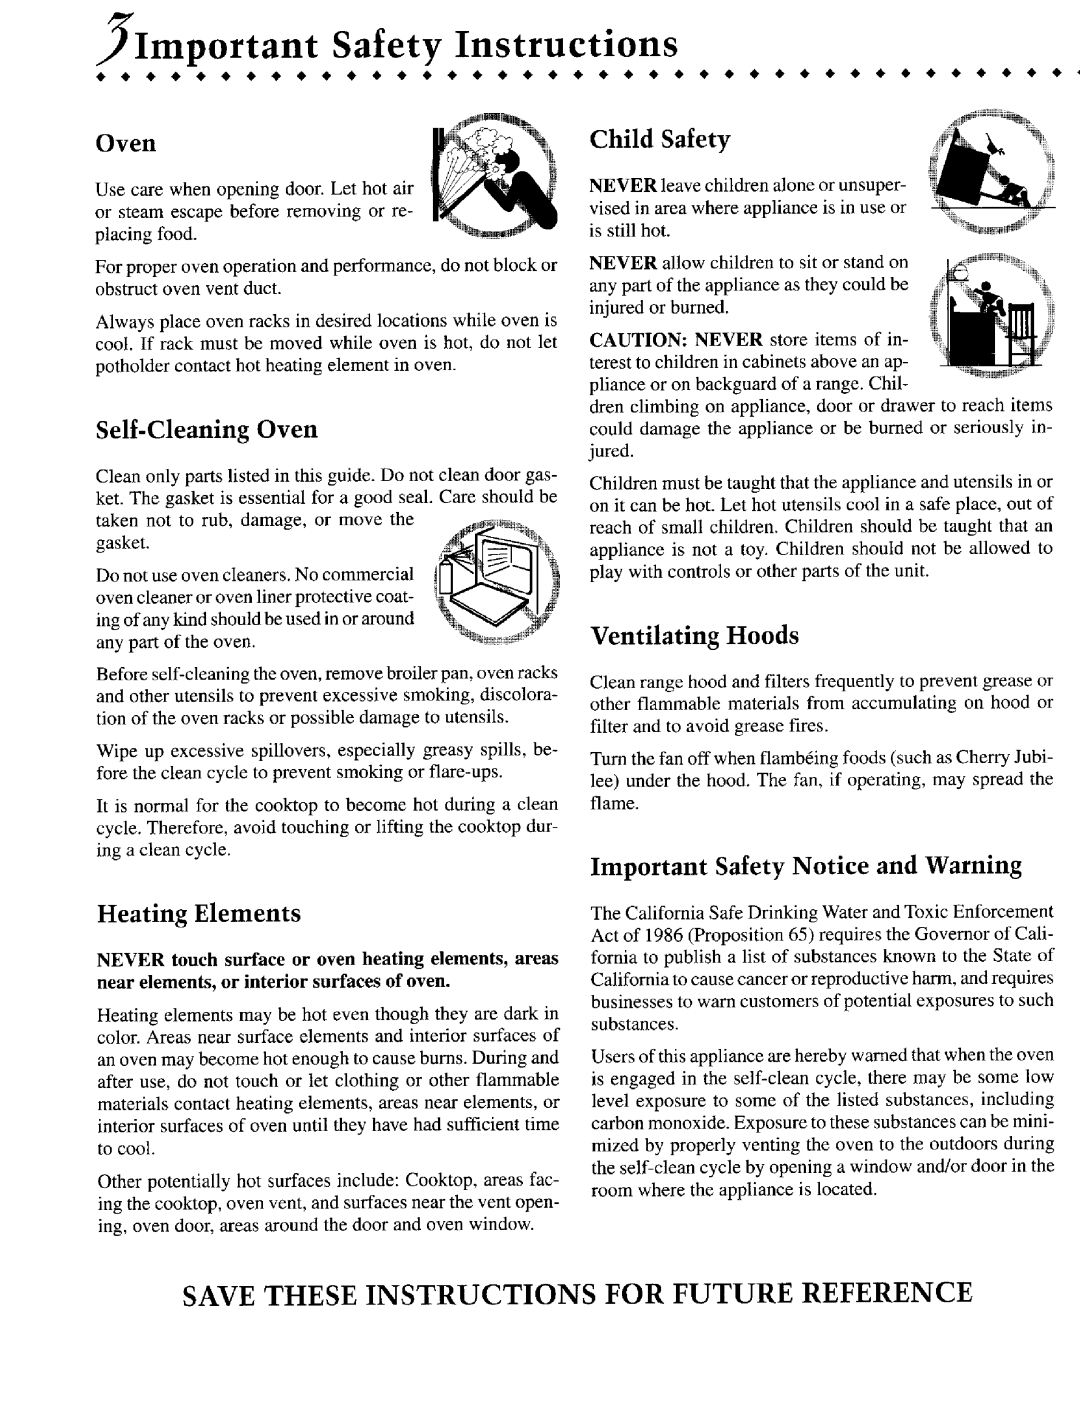 Jenn-Air JER8855, JER8850 Eih,Child Safety, Self-CleaningOven, Heating Elements, Important Safety Notice and Warning 